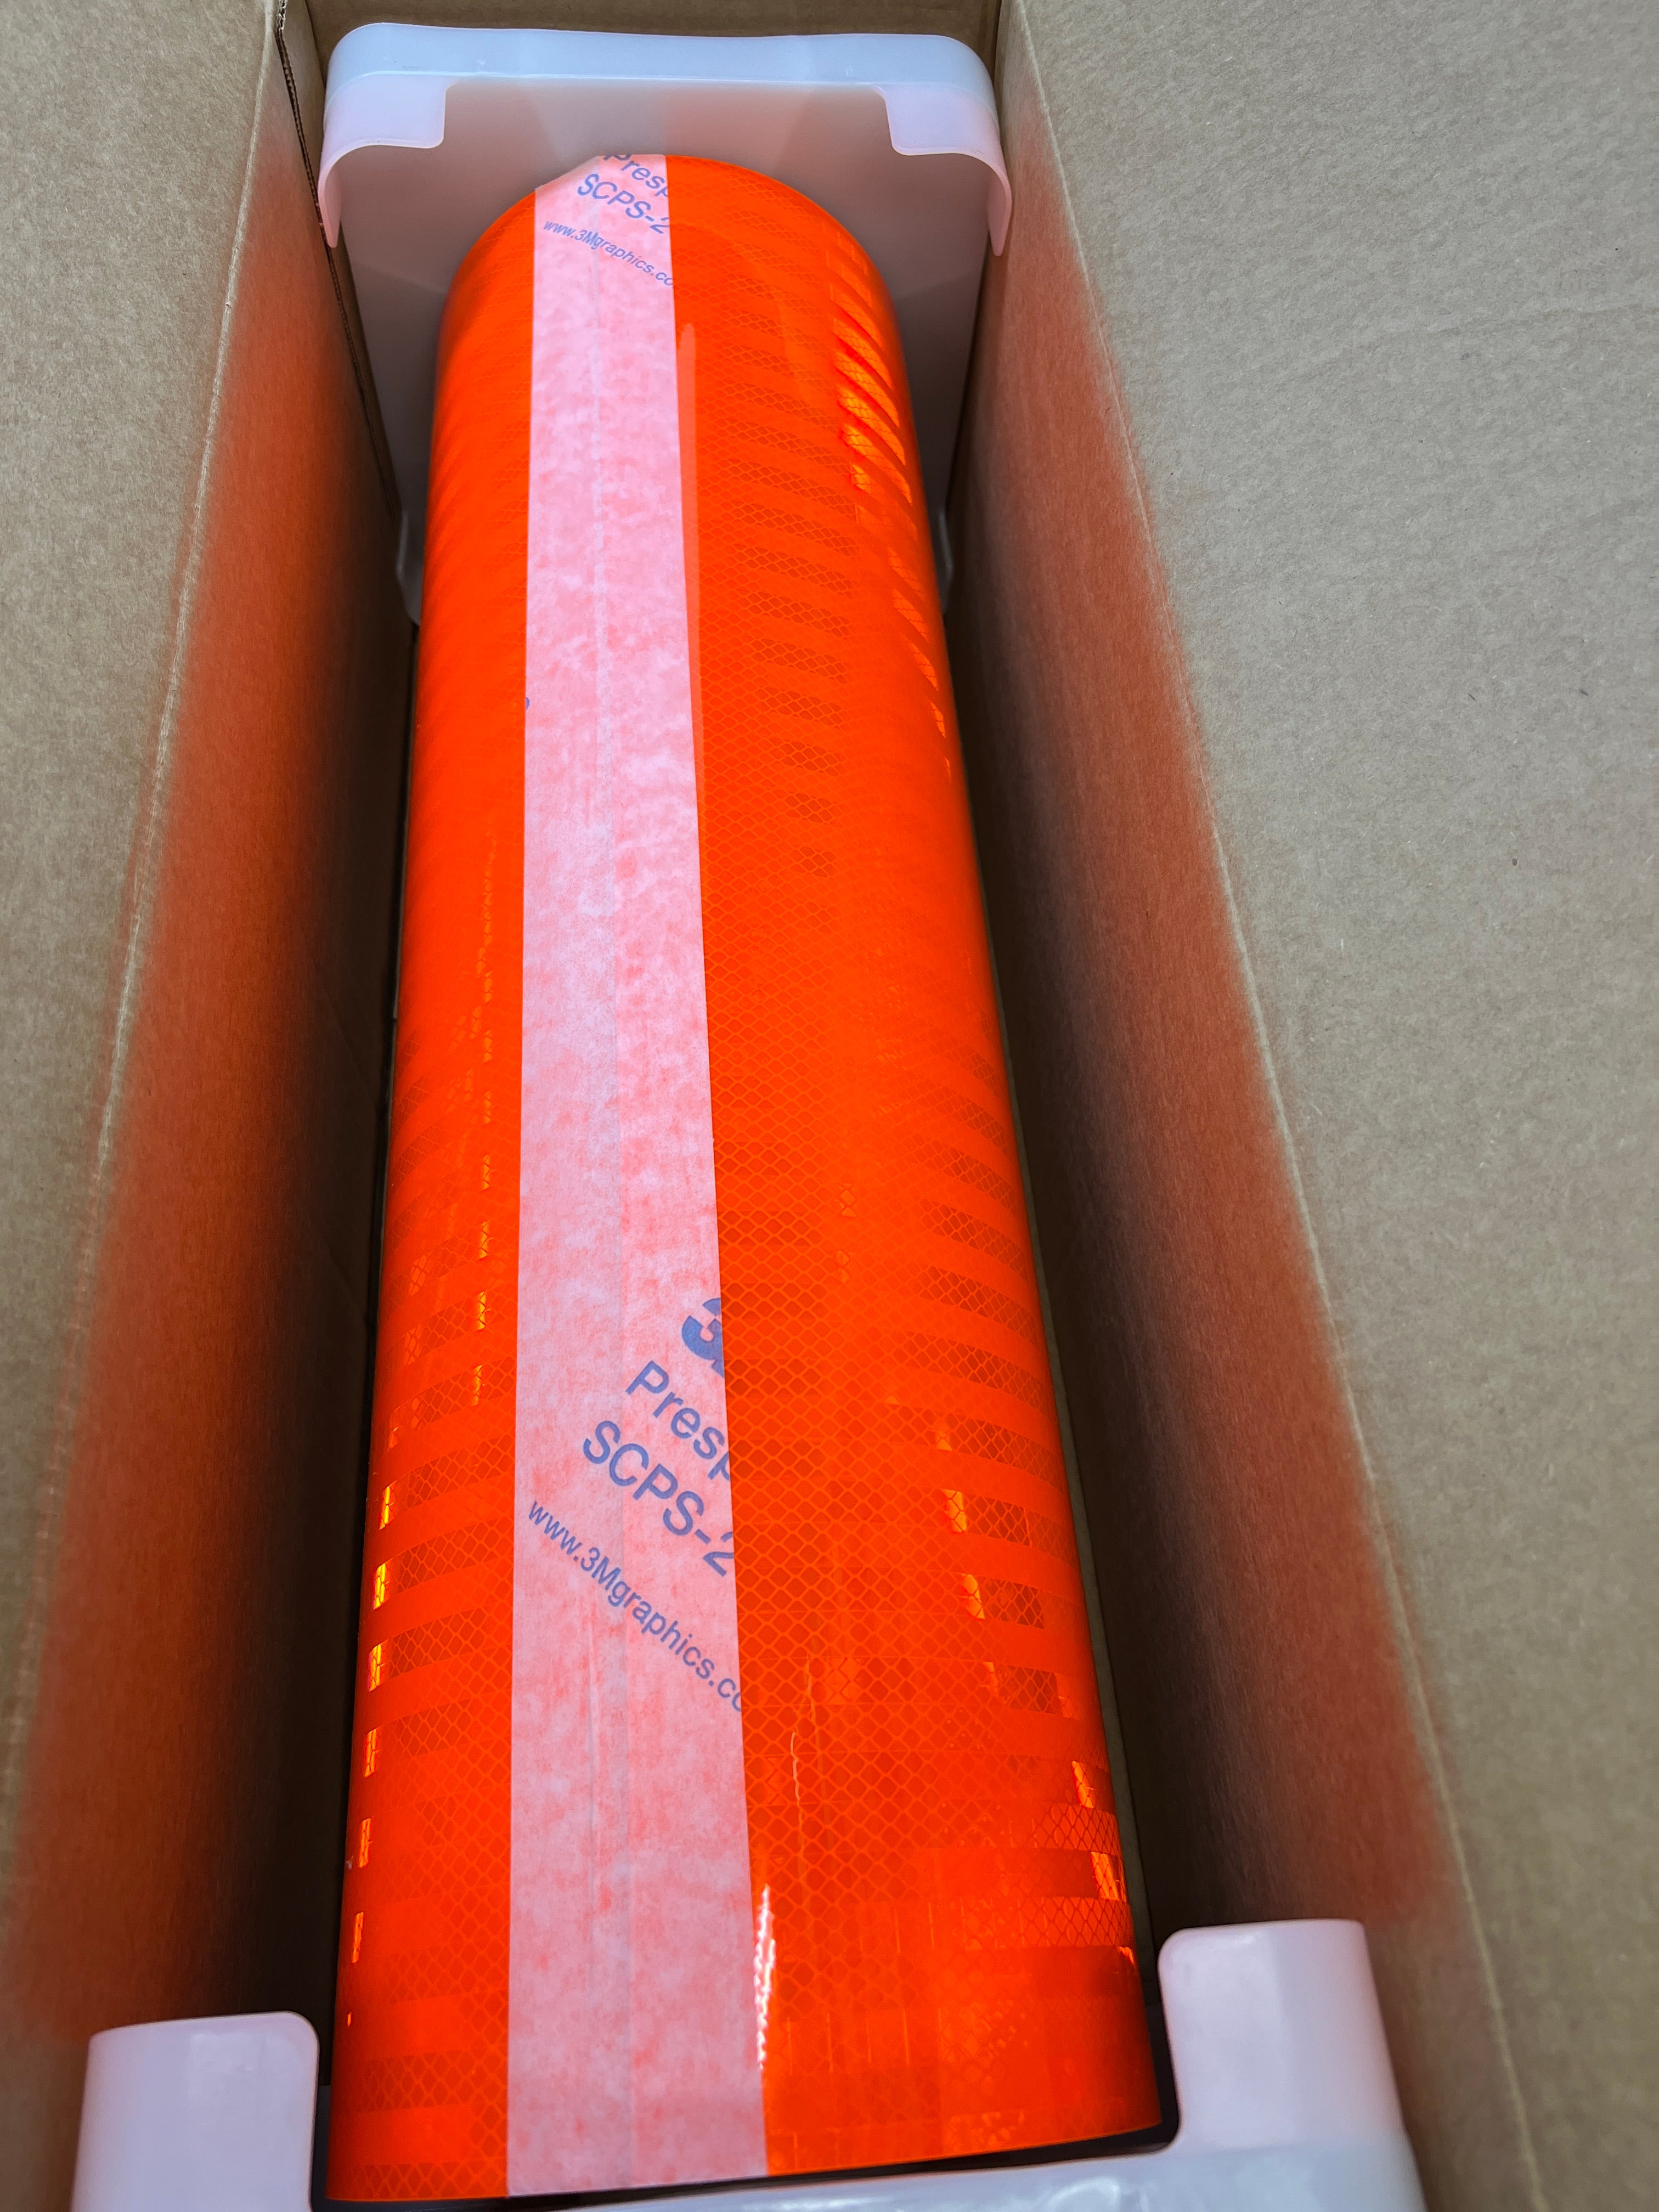 24" x 10' Foot Roll 3M Reflective Safety Tape Fluorescent Orange 3924S - Converted from Master Roll